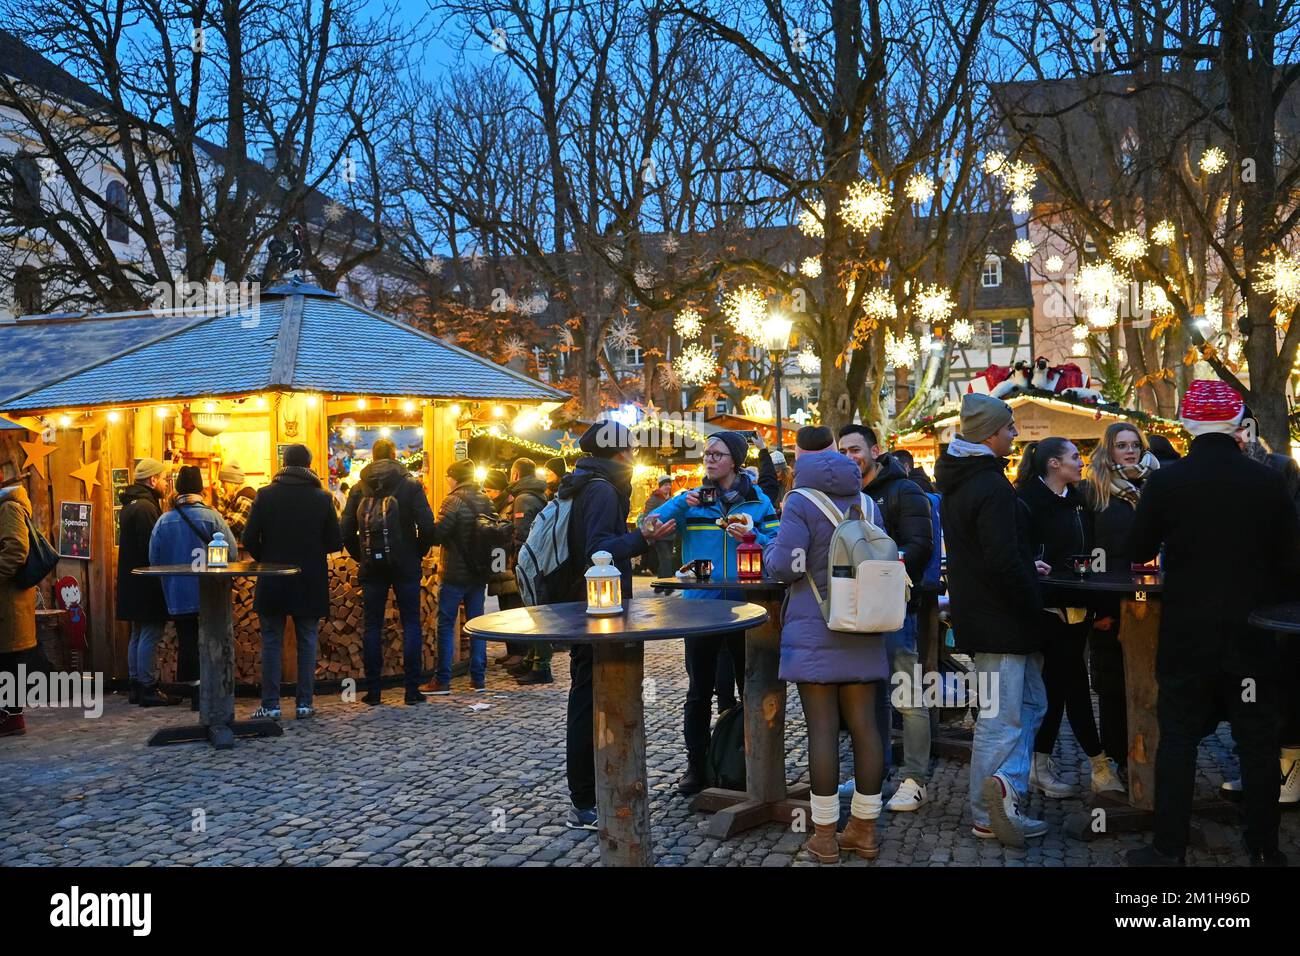 Christmas market in the Munsterplatz, near the Basel cathedral. Basel, Switzerland - December 2022 Stock Photo